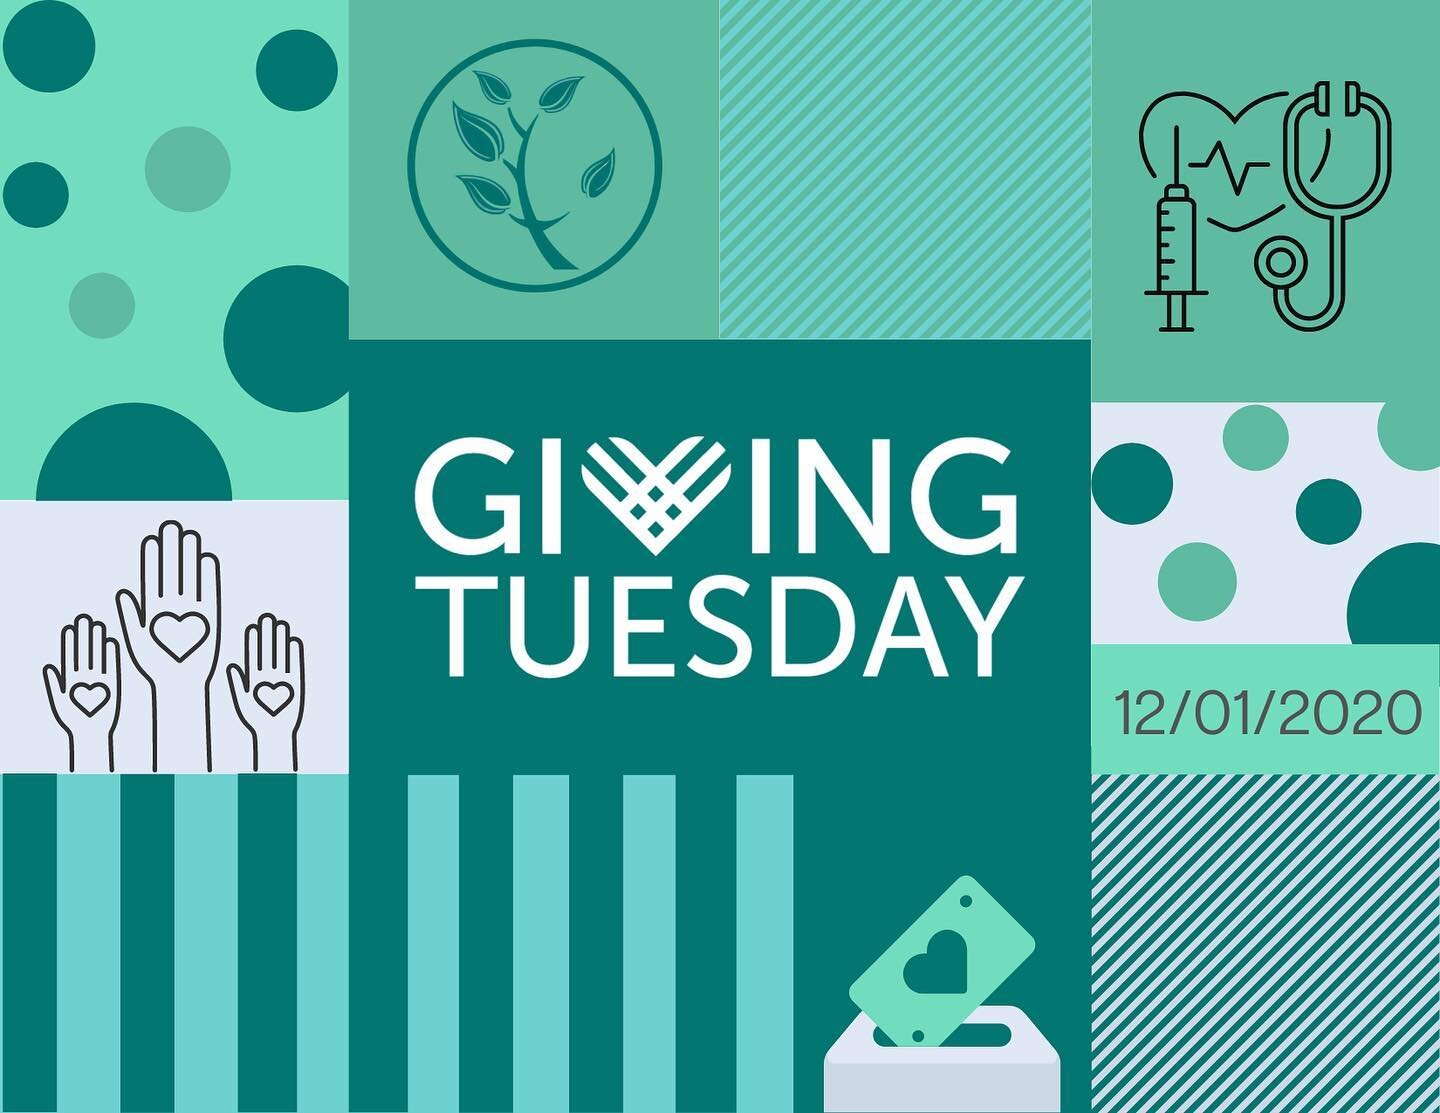 Today is THE day! Giving Tuesday has officially arrived and we are excited to celebrate with you. We know it has been quite a year.  Any amount you are able to donate will be much appreciated.  Just $1 donated equates to $6 of care for our 4,000+ pat